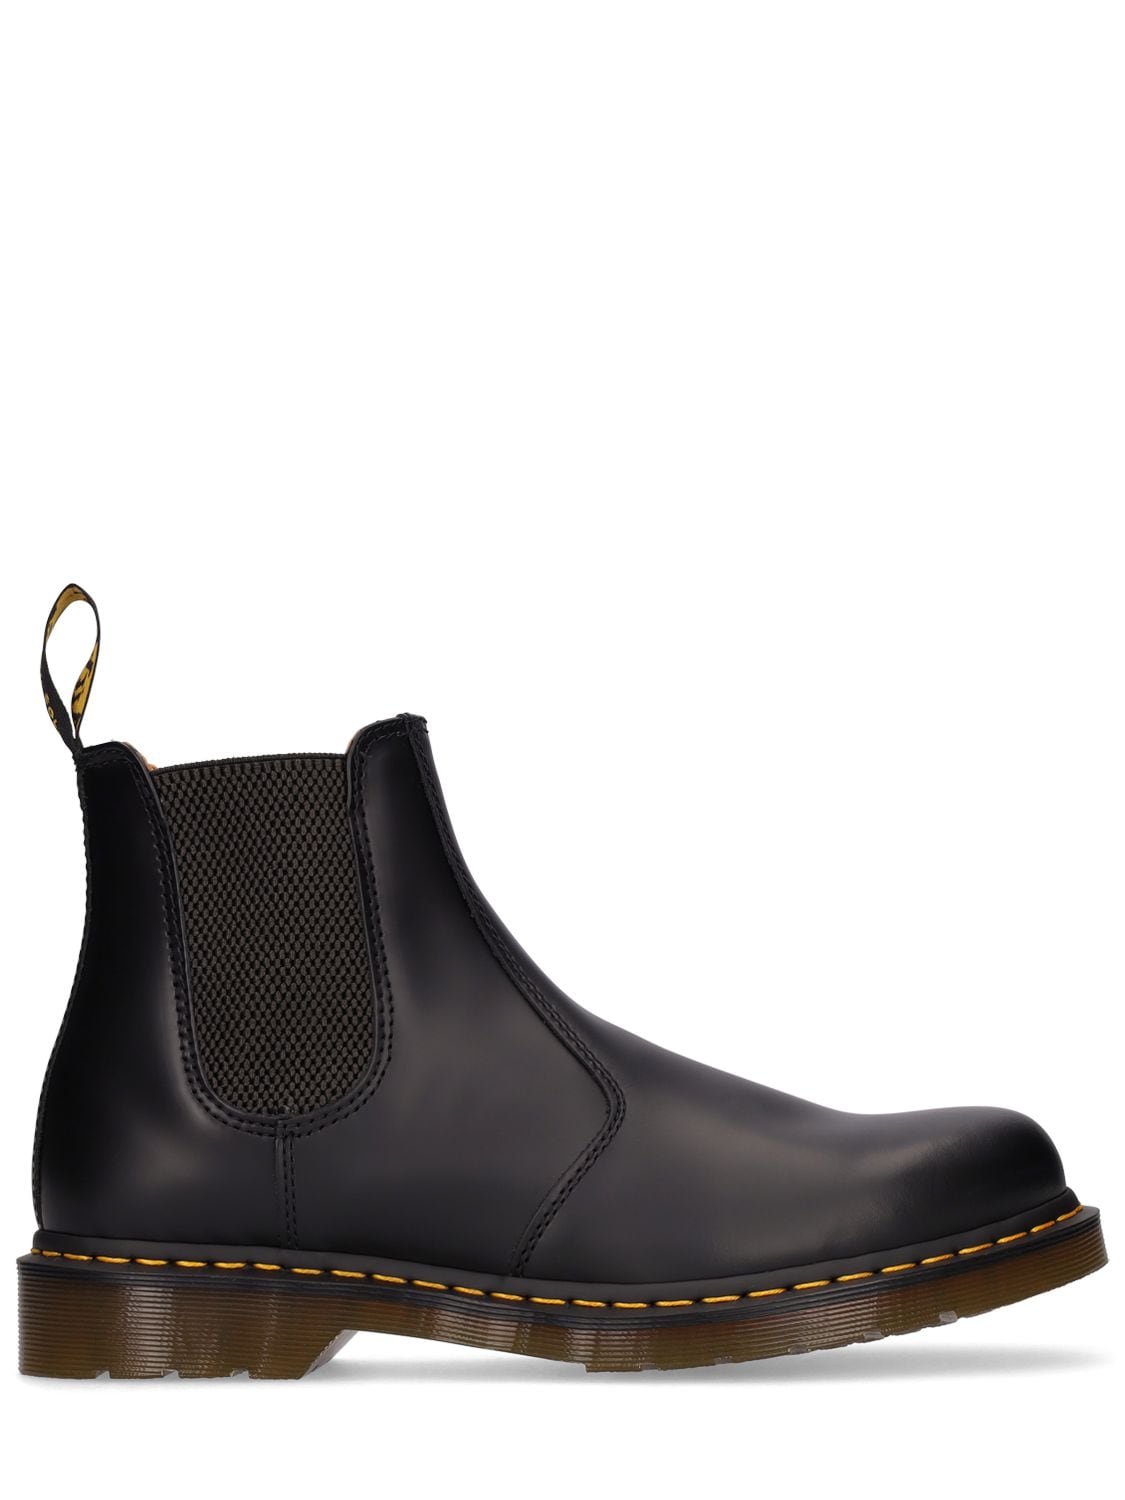 Dr. Martens' 2976 Smooth Leather Chelsea Boots